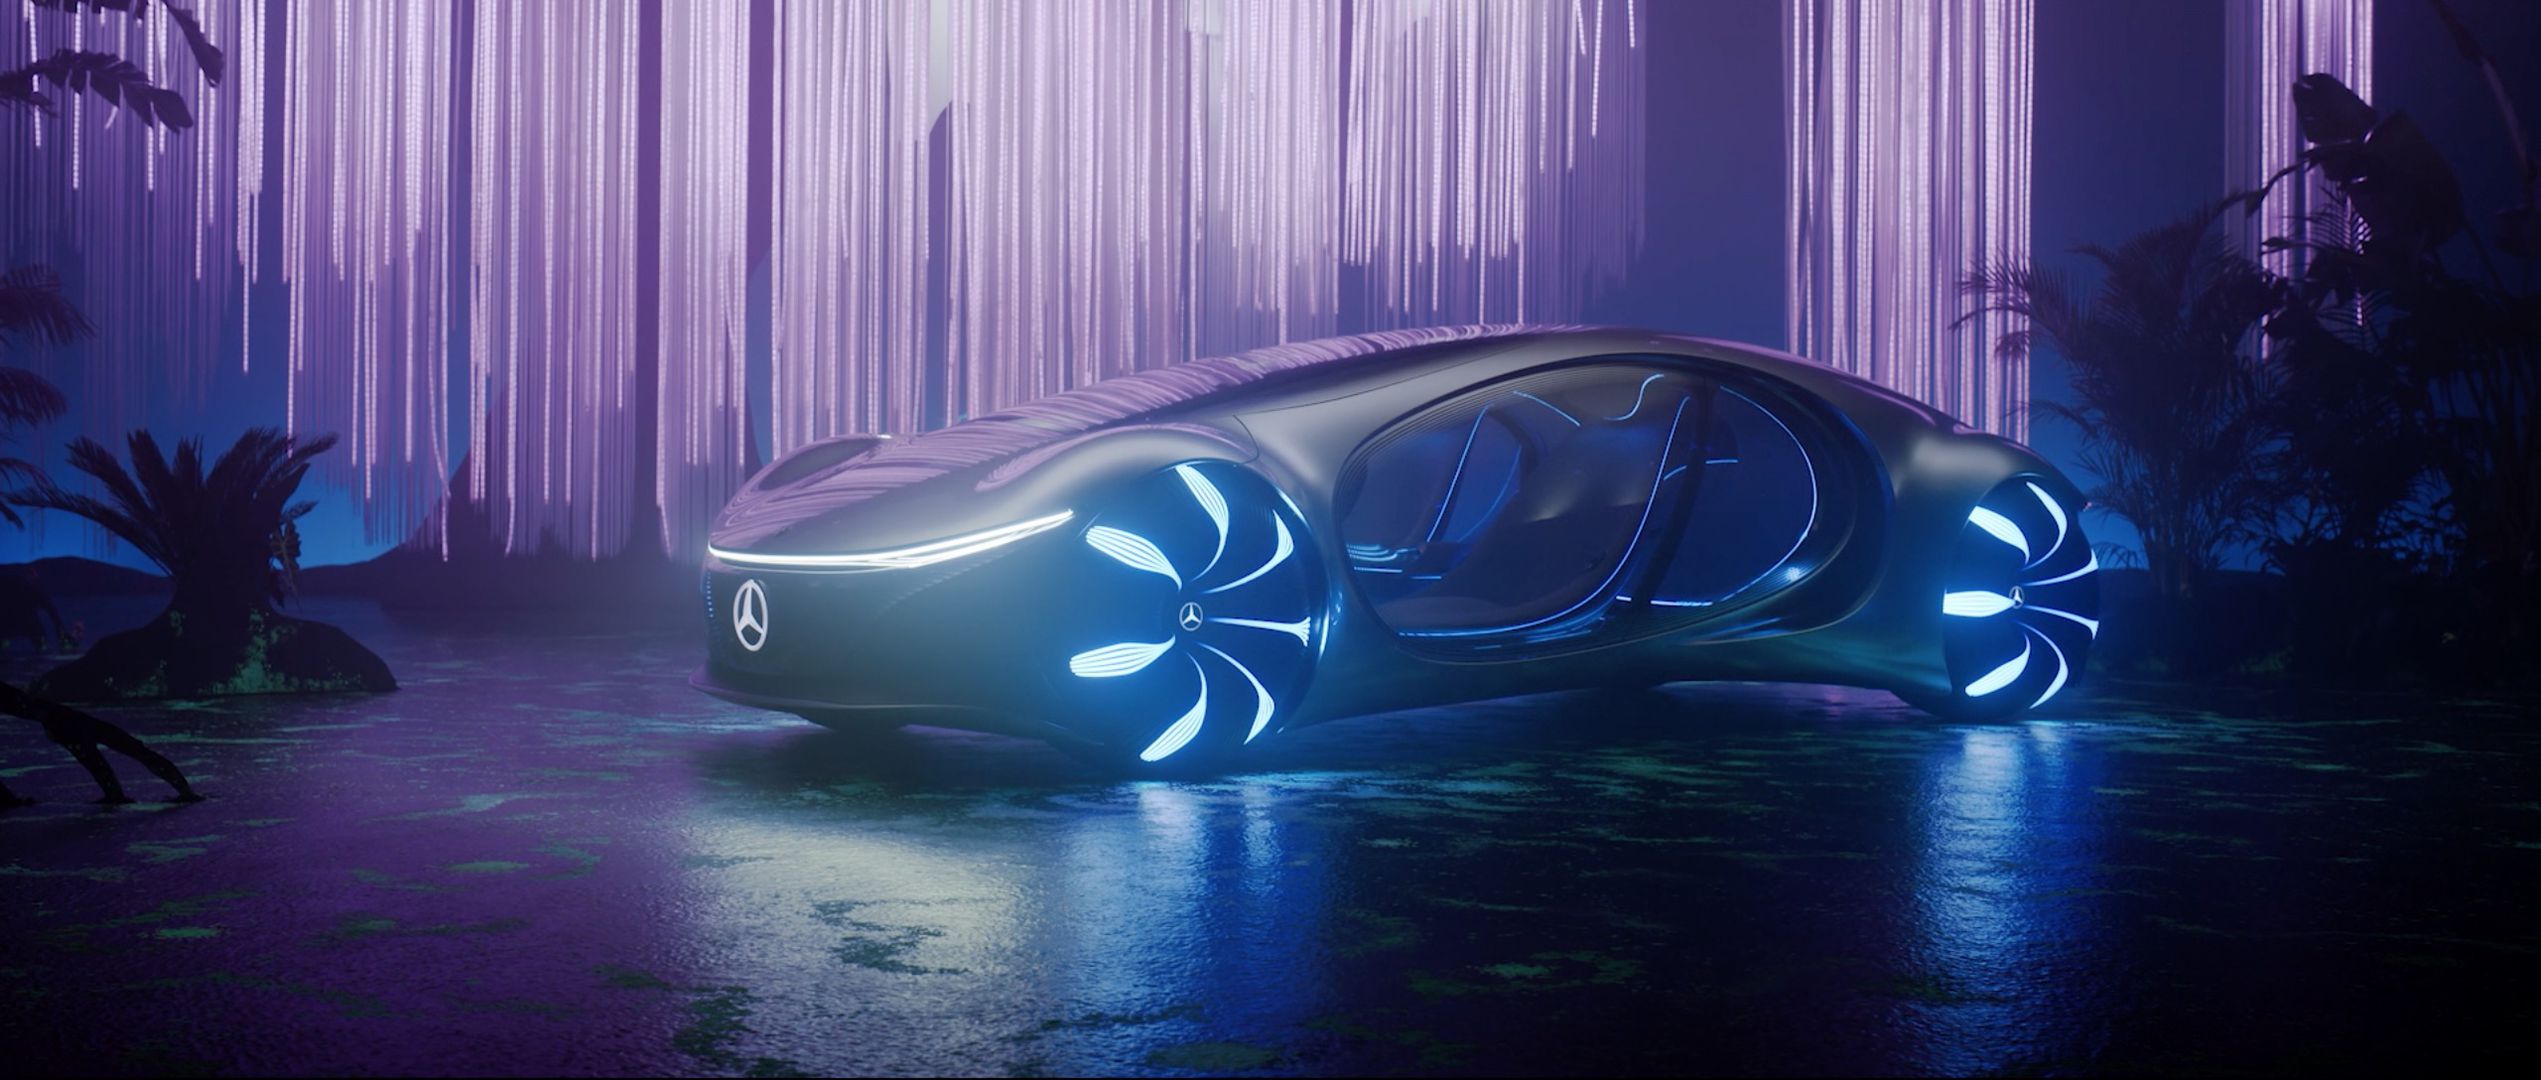 Mercedes Benz Unveils An Avatar Themed Concept Car With Scales